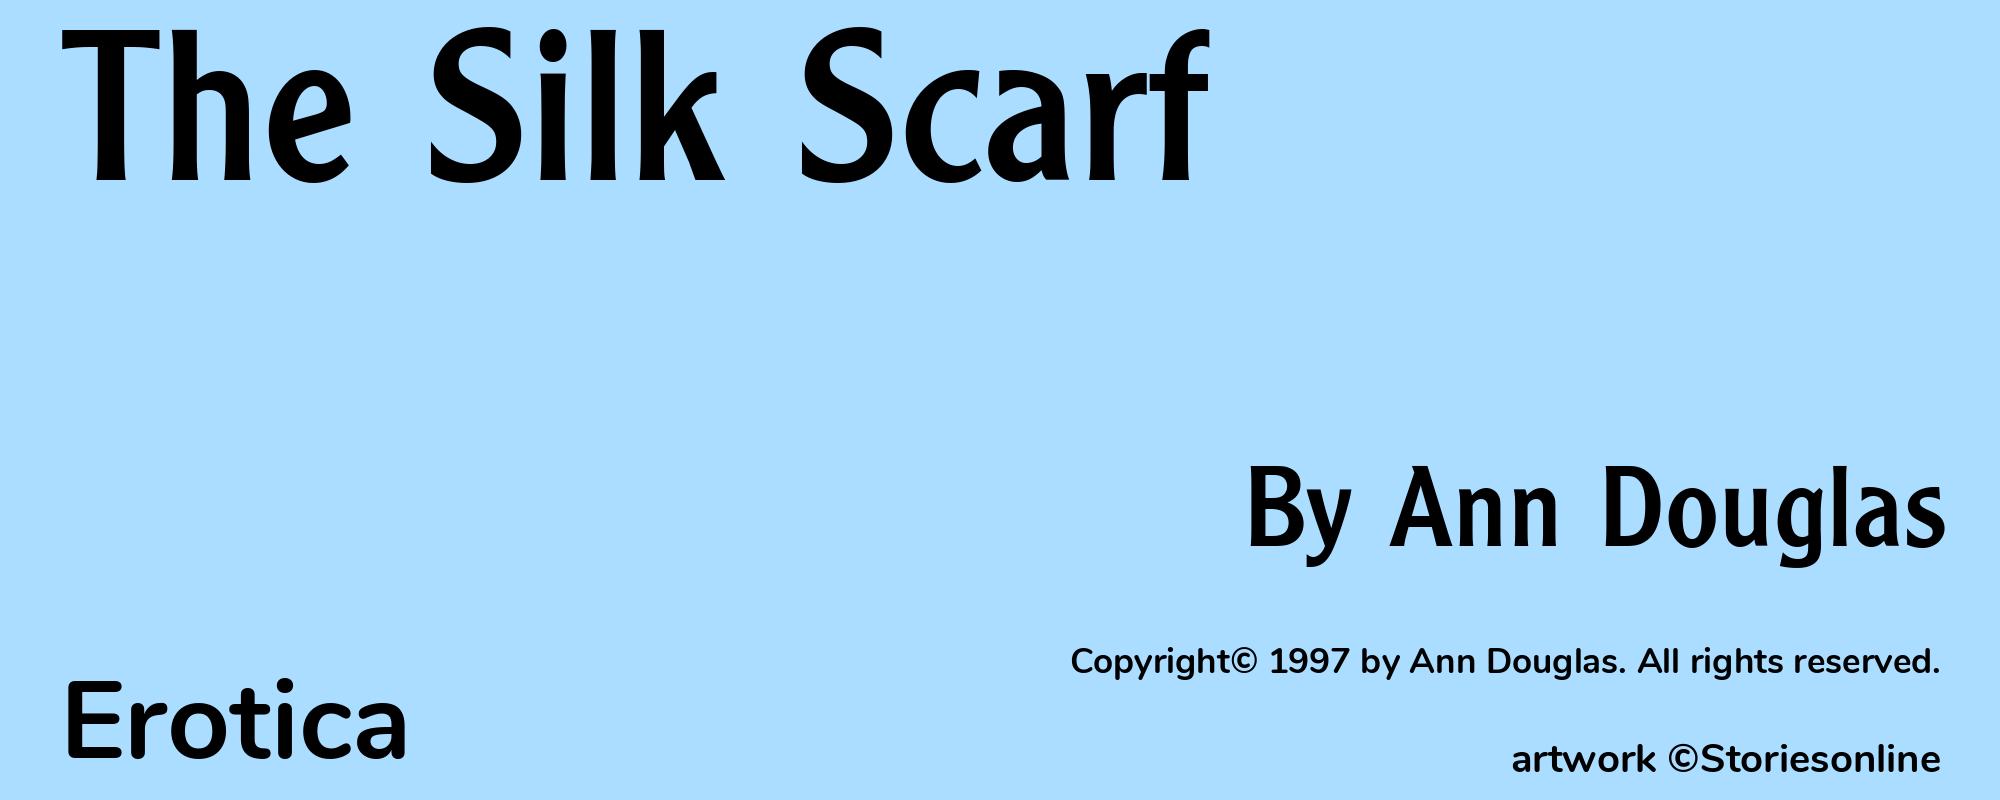 The Silk Scarf - Cover